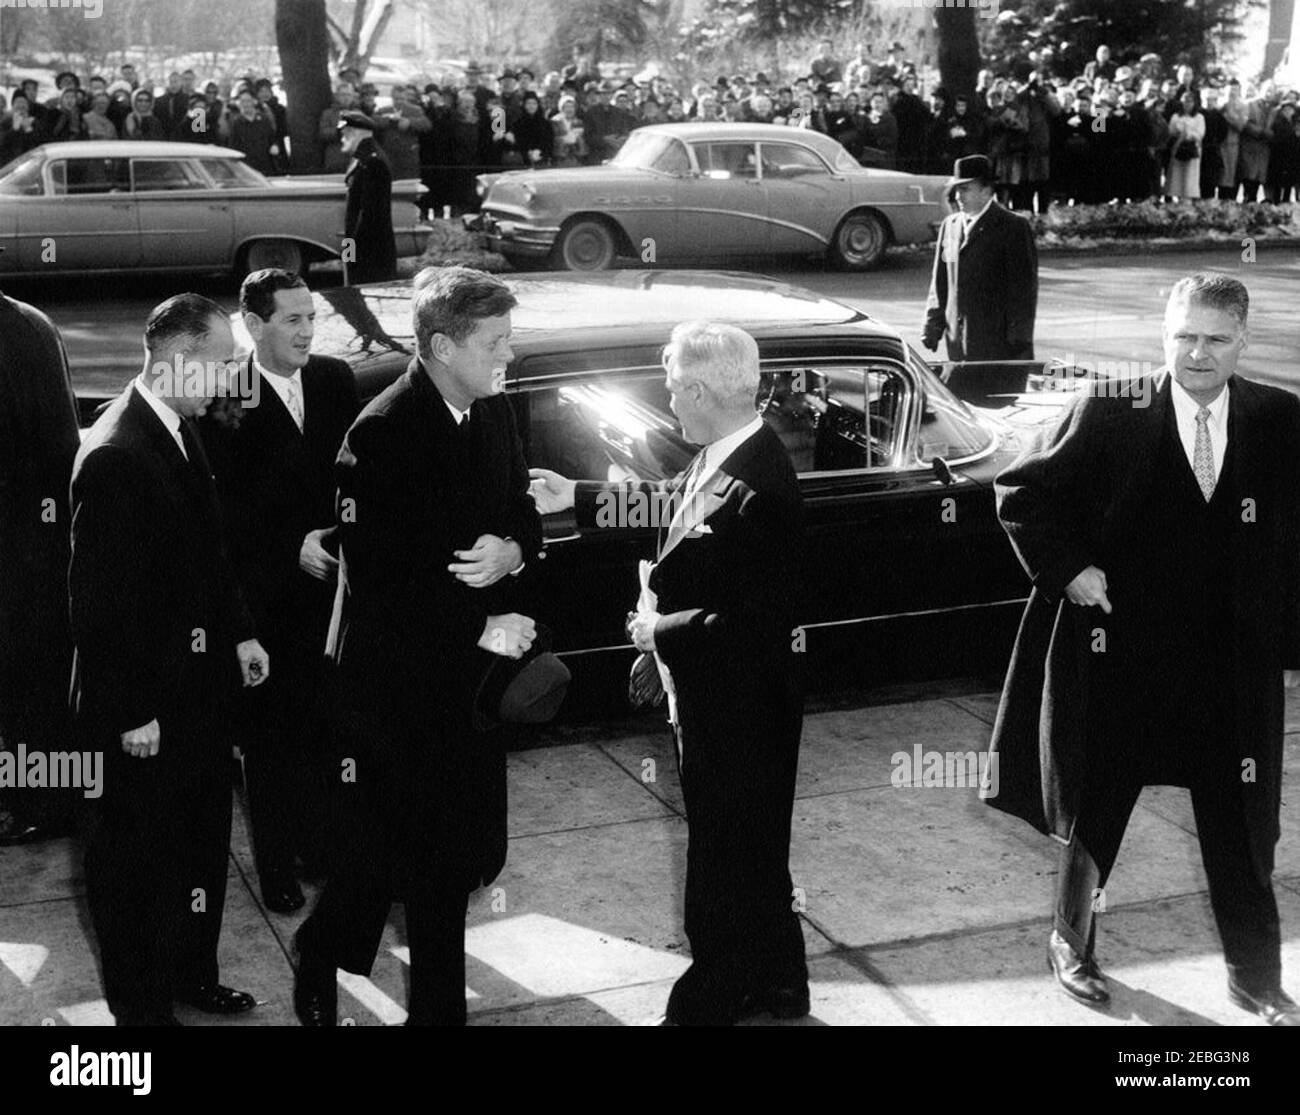 President Kennedy attends Mass, 10:54AM. President John F. Kennedy arrives to attend the annual Red Mass at the Cathedral of Saint Matthew the Apostle. (L-R) Dr. Charles A. Hufnagel; Special Assistant to the President Timothy J. Reardon, Jr.; President Kennedy; two unidentified men; White House Secret Service agent, James J. Rowley. Washington, D.C.rnrn Stock Photo